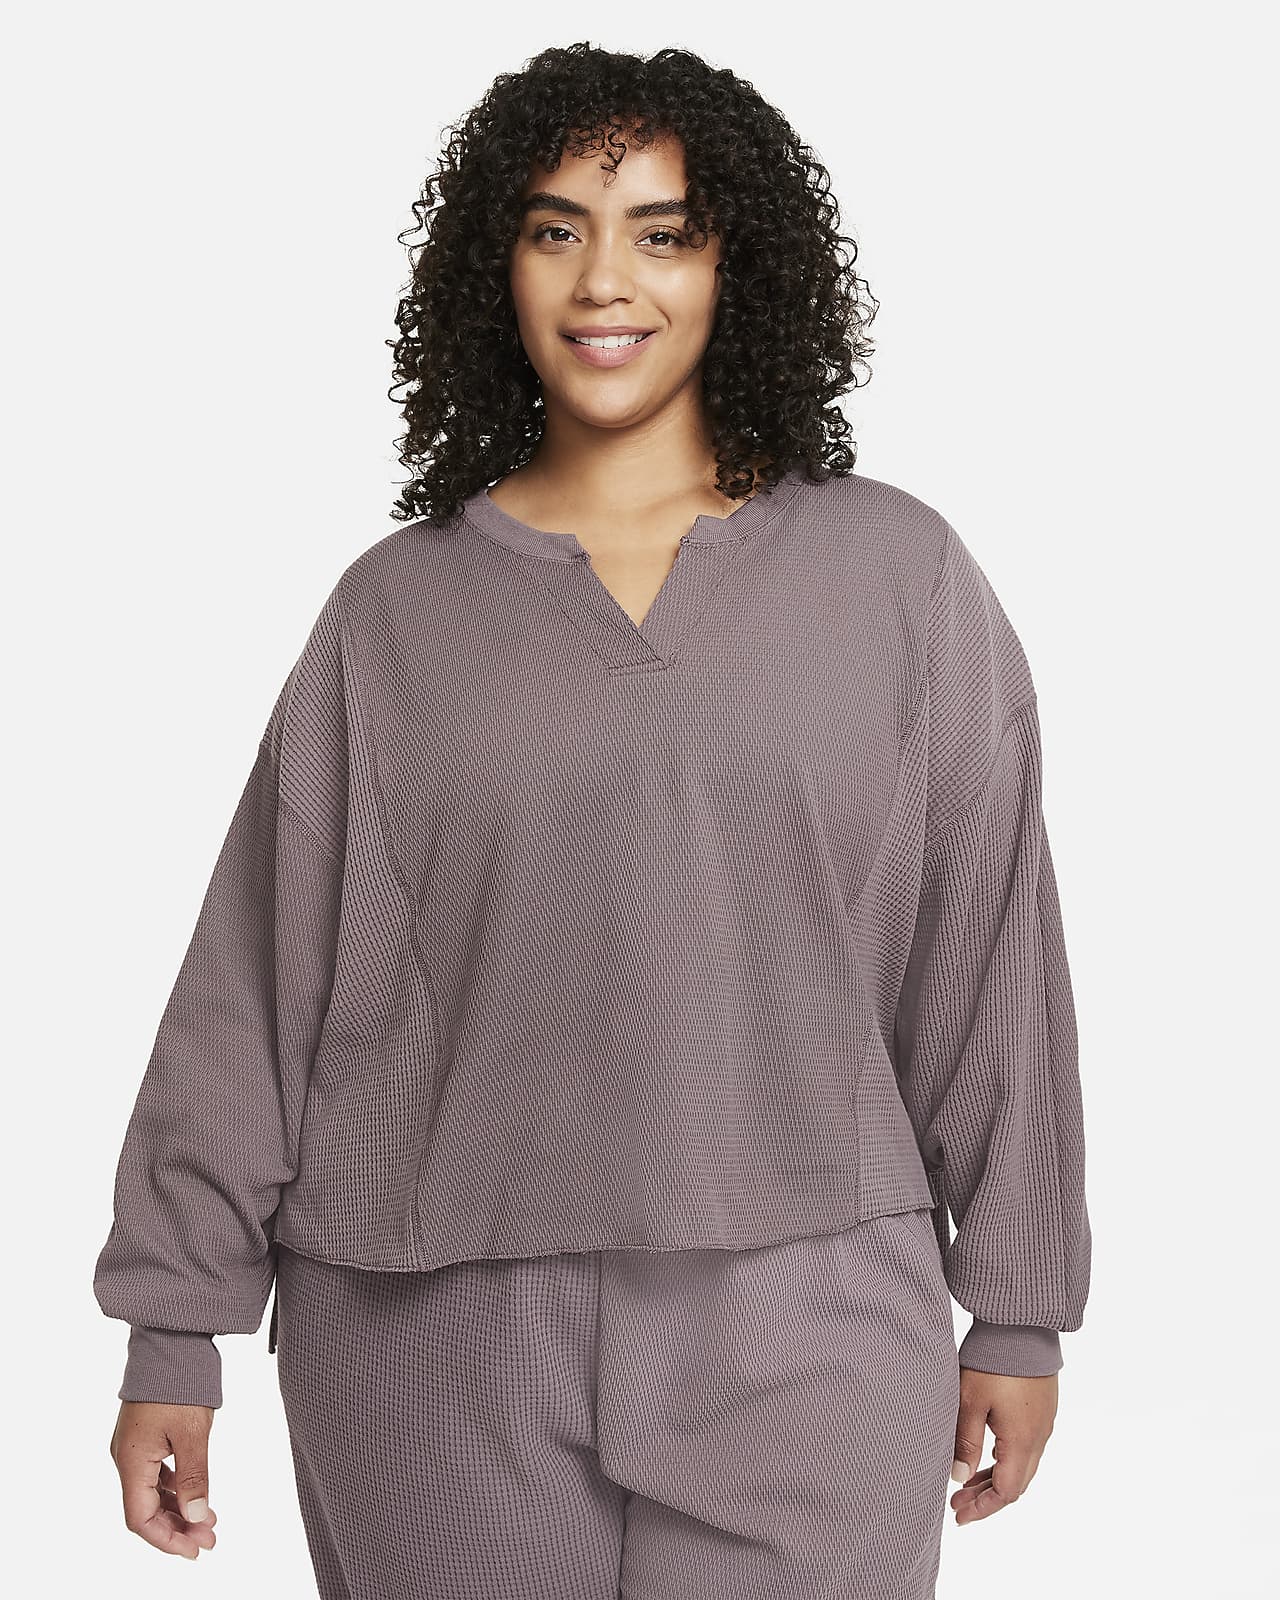 Nike Yoga Luxe Dri-FIT Women's Cover-Up (Plus Size)